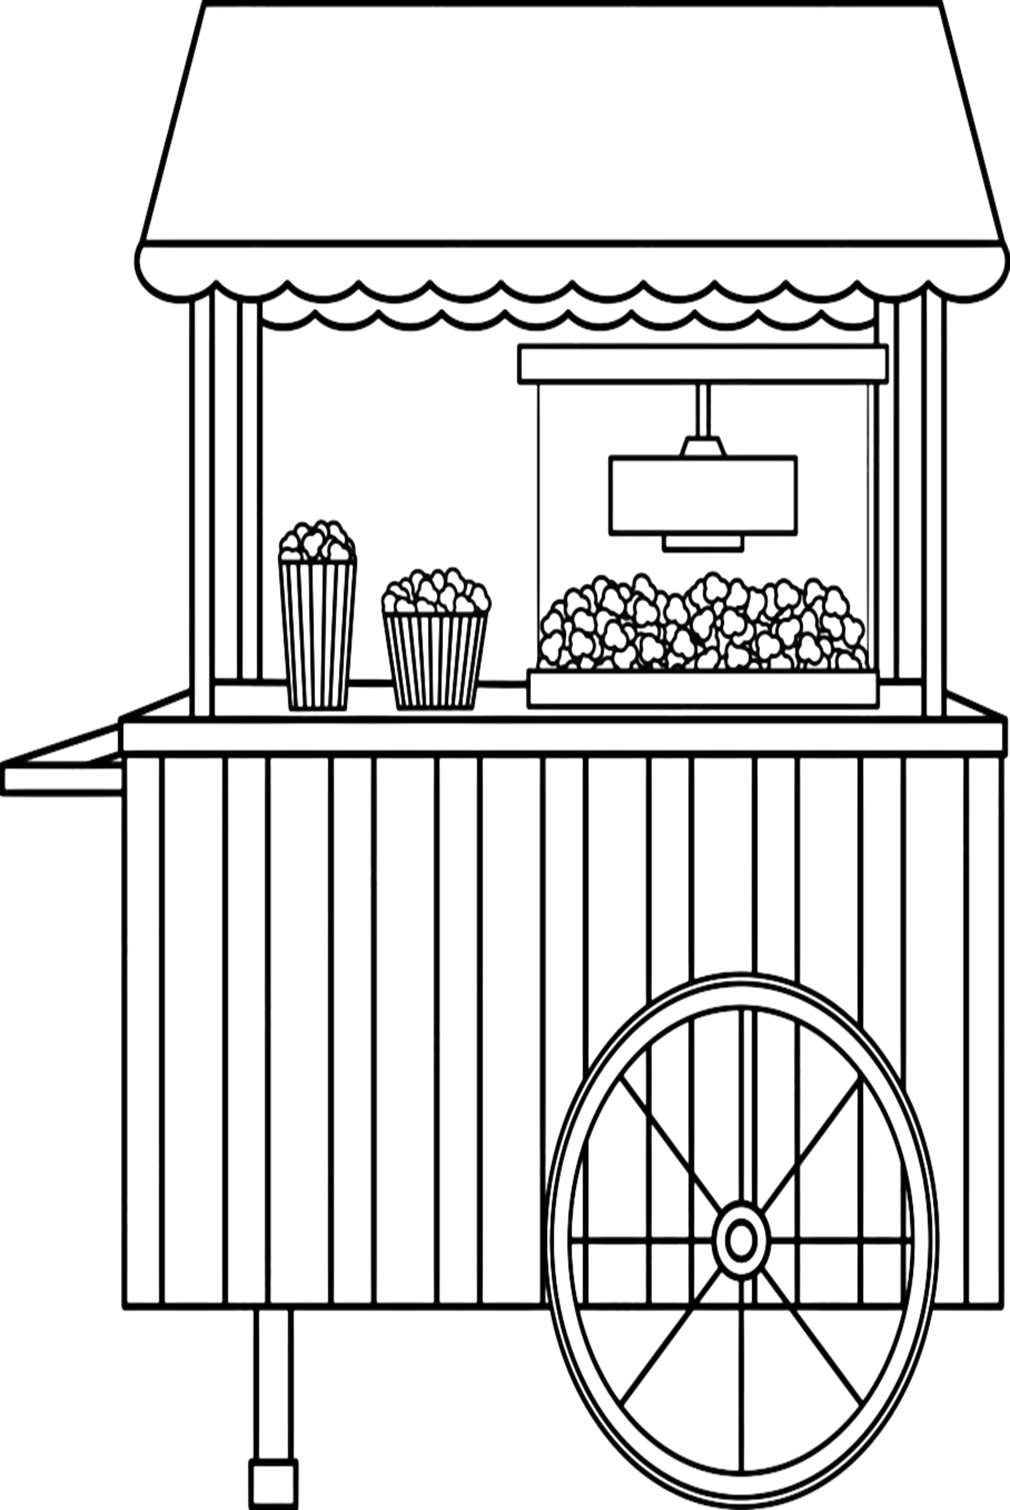 Popcorn Coloring Pages Printable